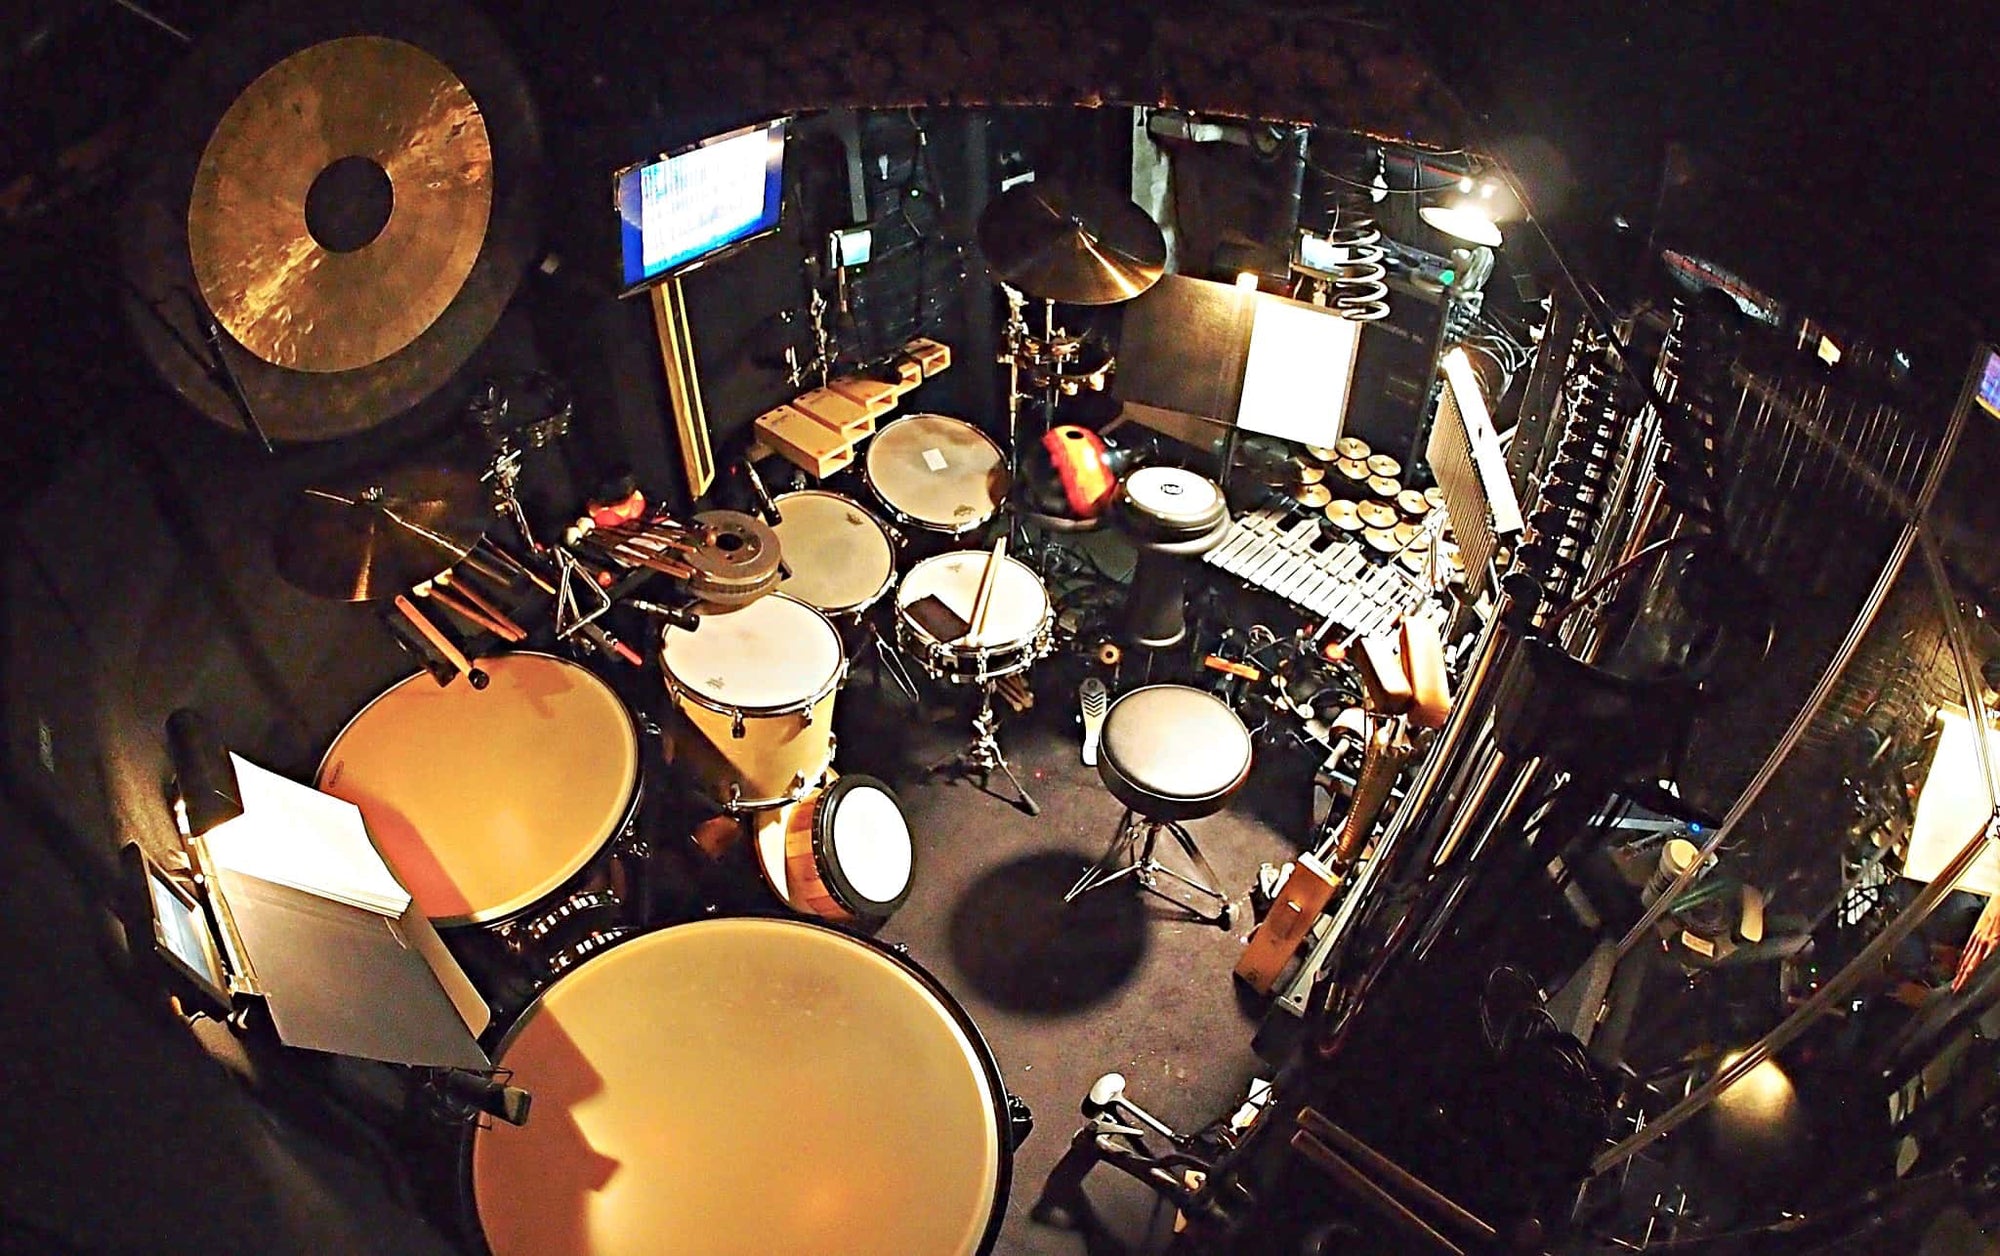 Dave Roth’s percussion setup for the Broadway production of Finding Neverland at the Lunt-Fontanne Theatre.